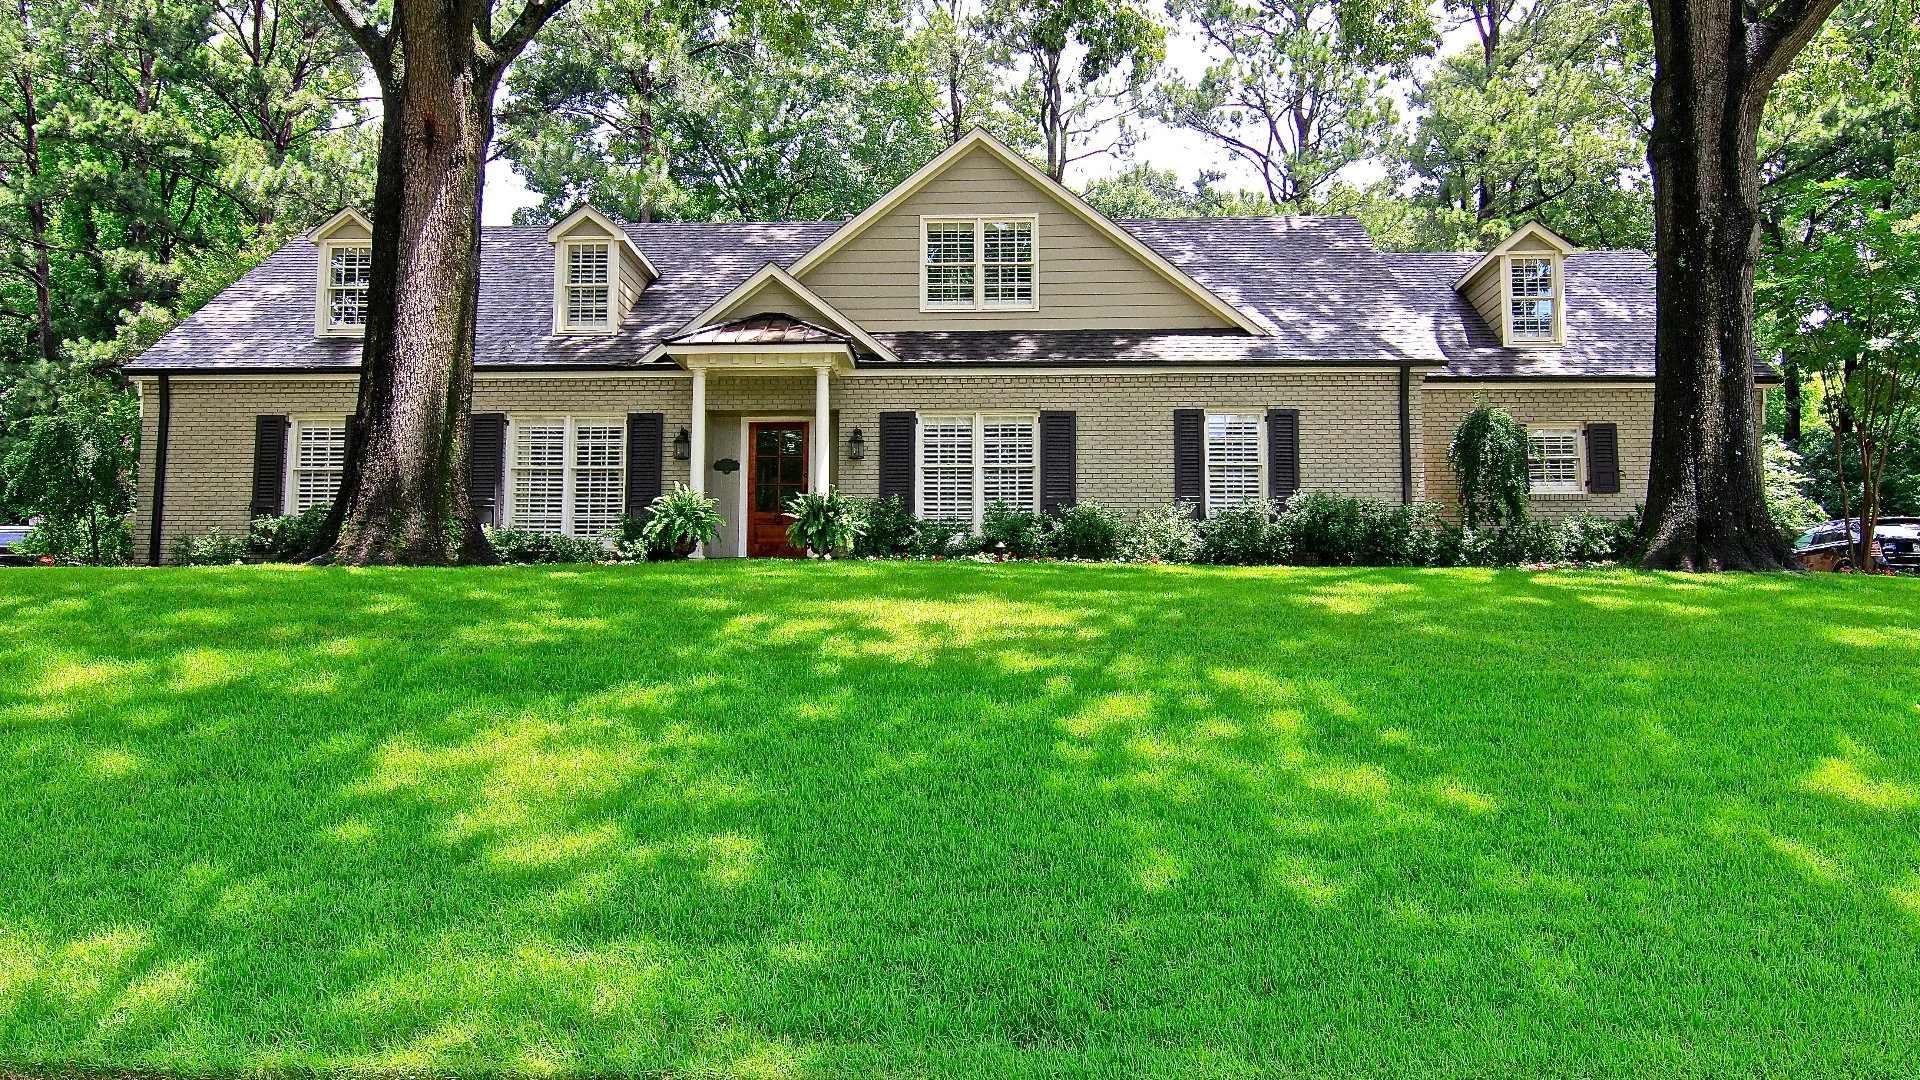 Home in Memphis, TN with green grass that's weed-free.